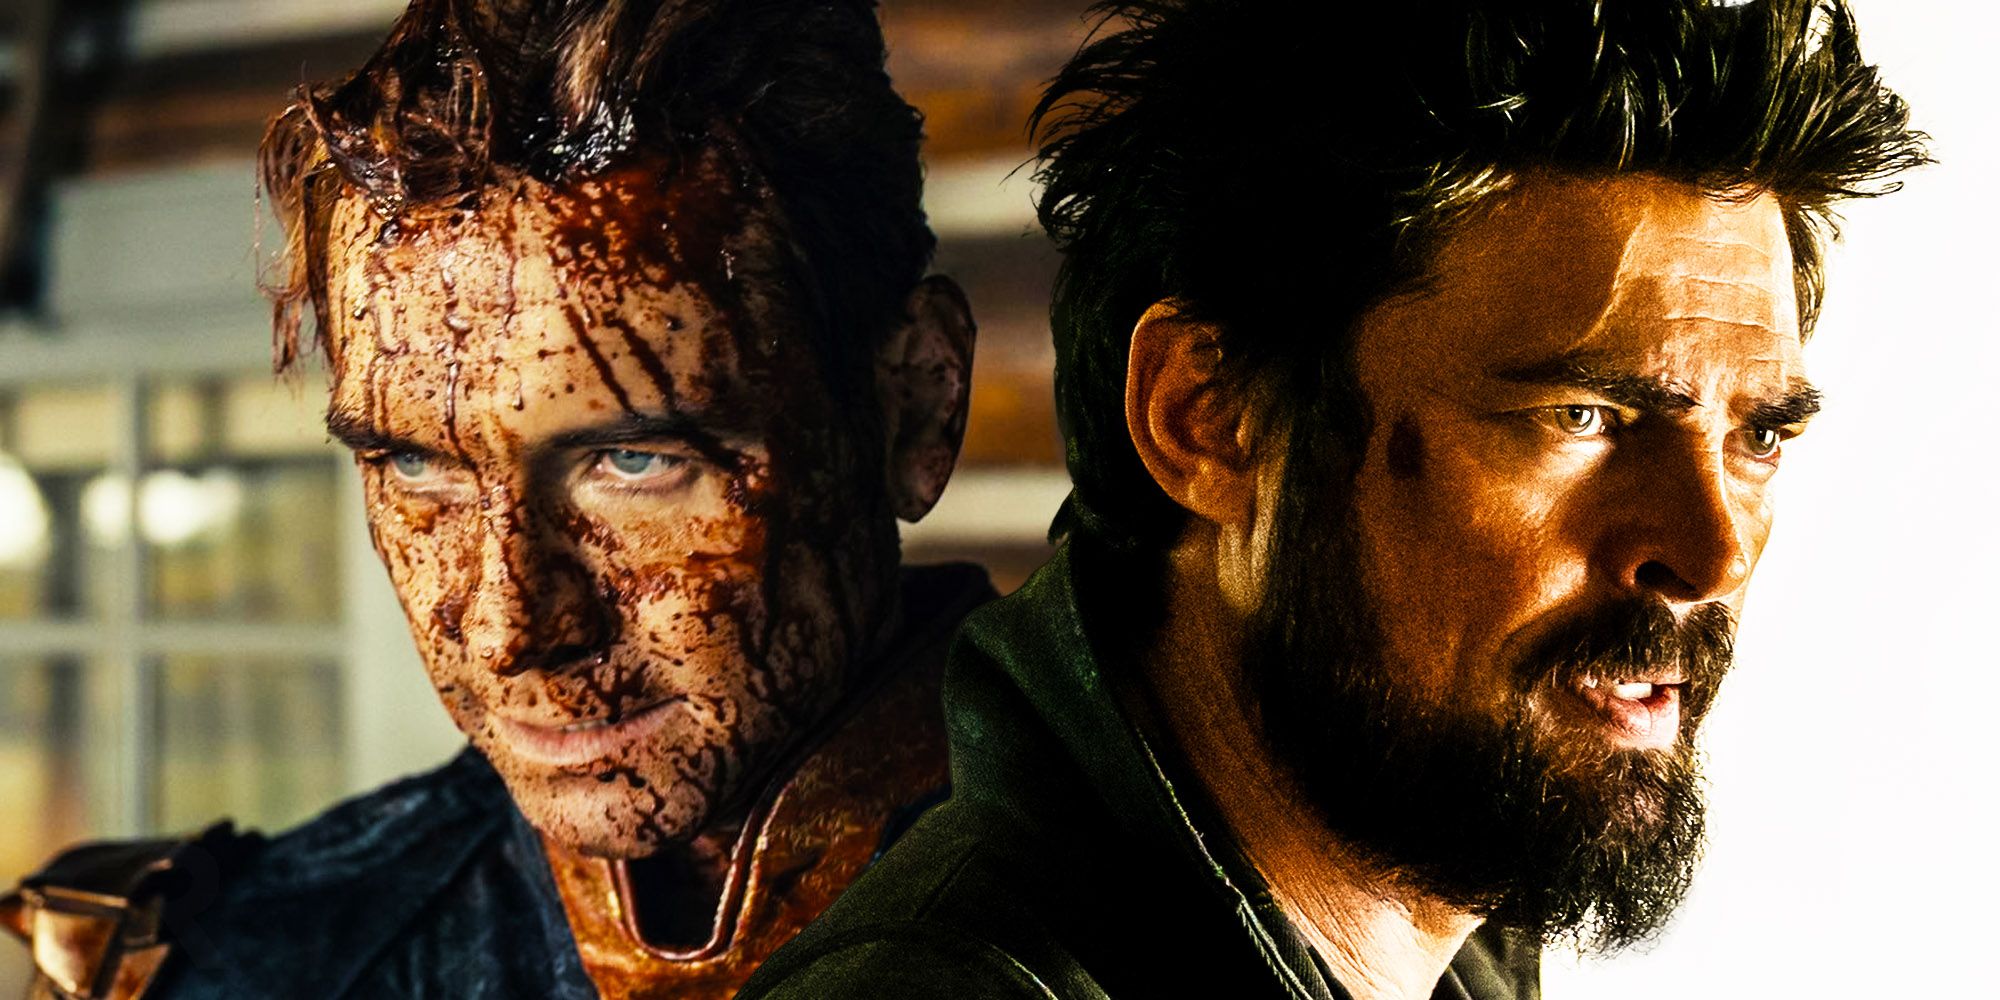 Anthony Starr as Homelander covered in blood, and Karl Urban as Billy Butcher in The Boys